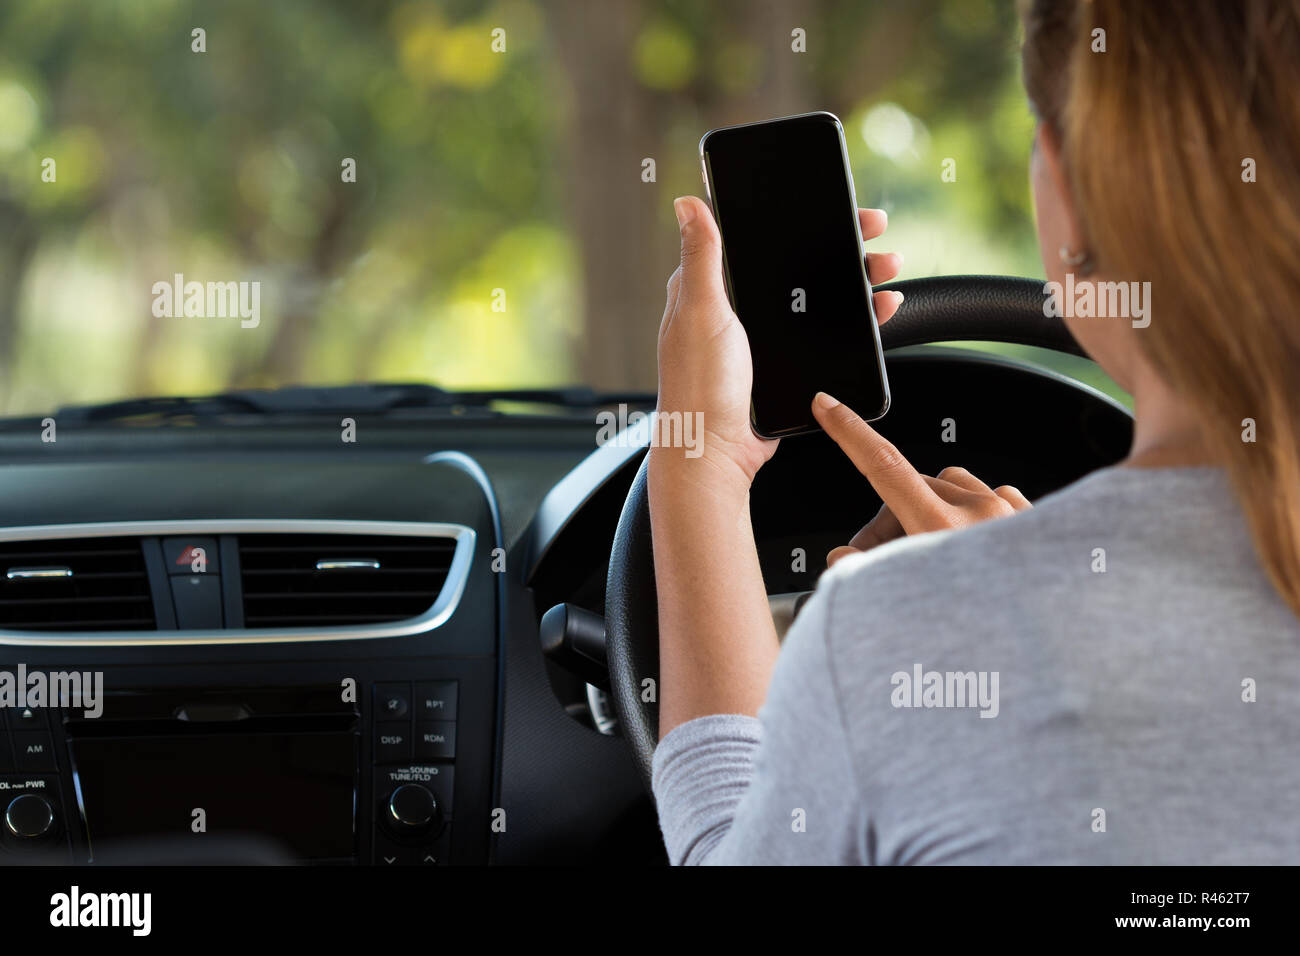 woman using phone in car on road Stock Photo